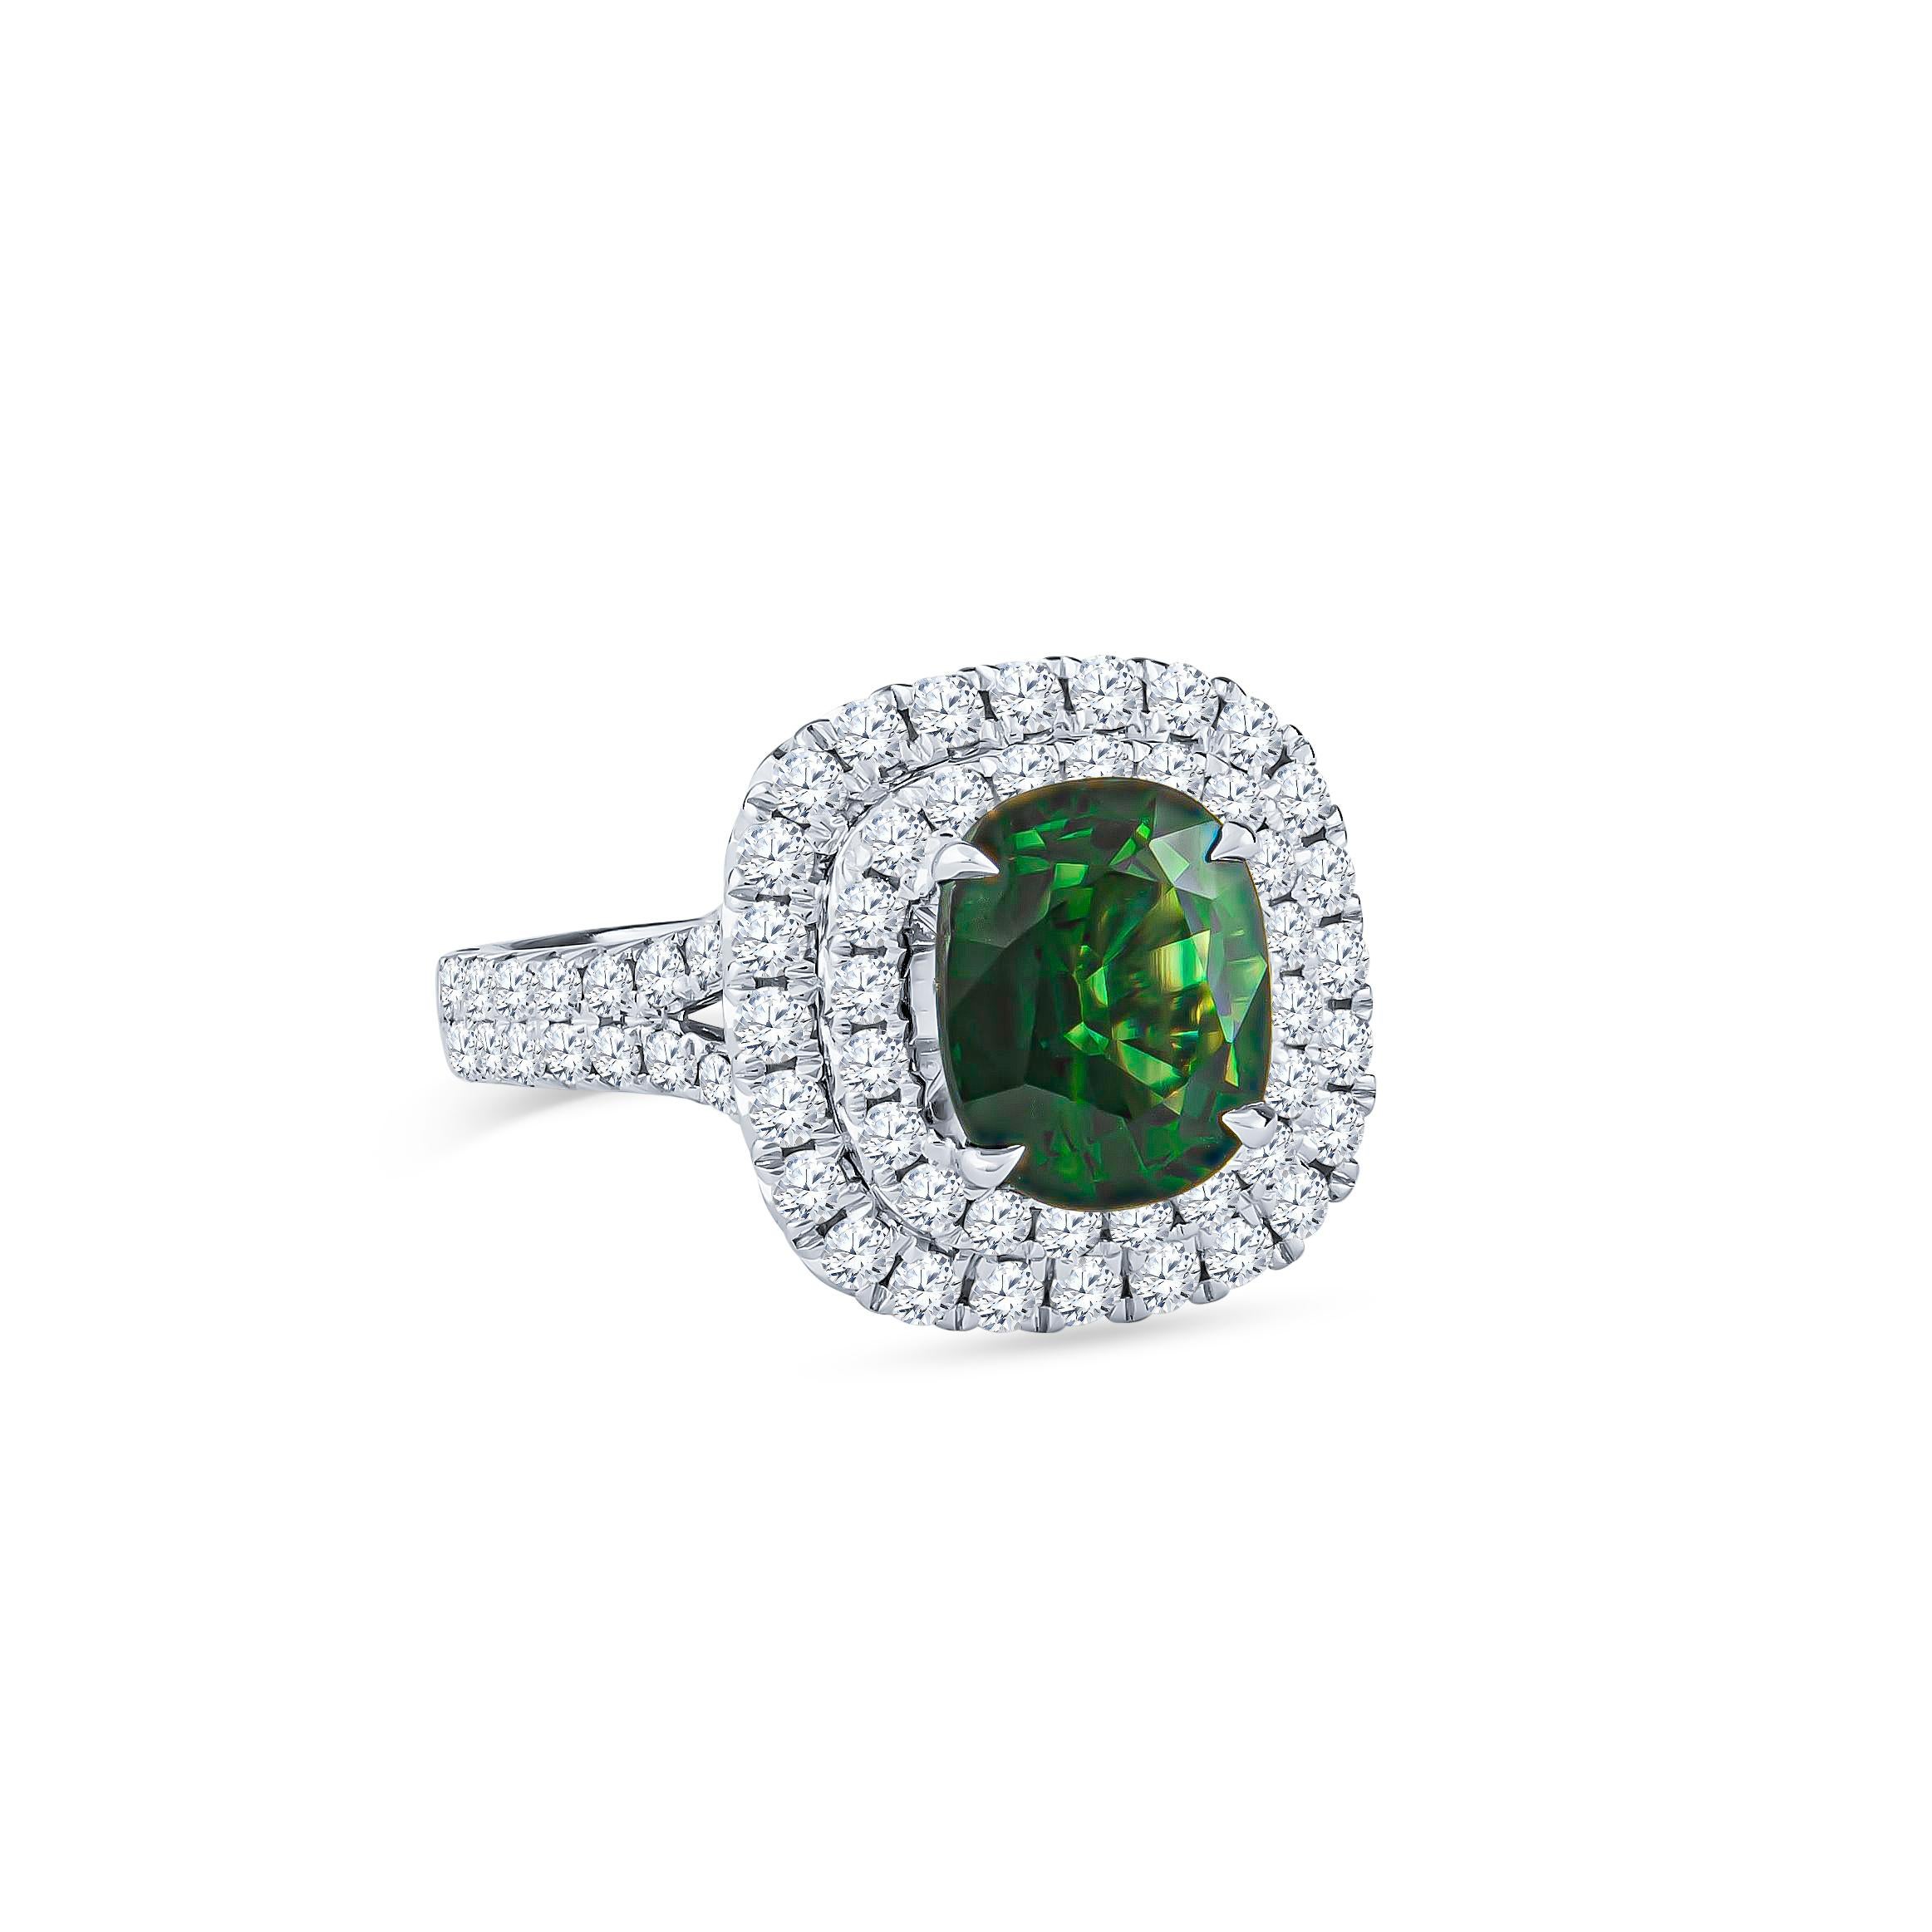 Gorgeous 18k white gold ring spotlighting a GIA graded cushion cut green sapphire weighing 3.12 carats surrounded by 1.17 carats total fine round brilliant cut diamonds set in double halo form (F-G color VS2-SI1 clarity). Ring was crafted in a size